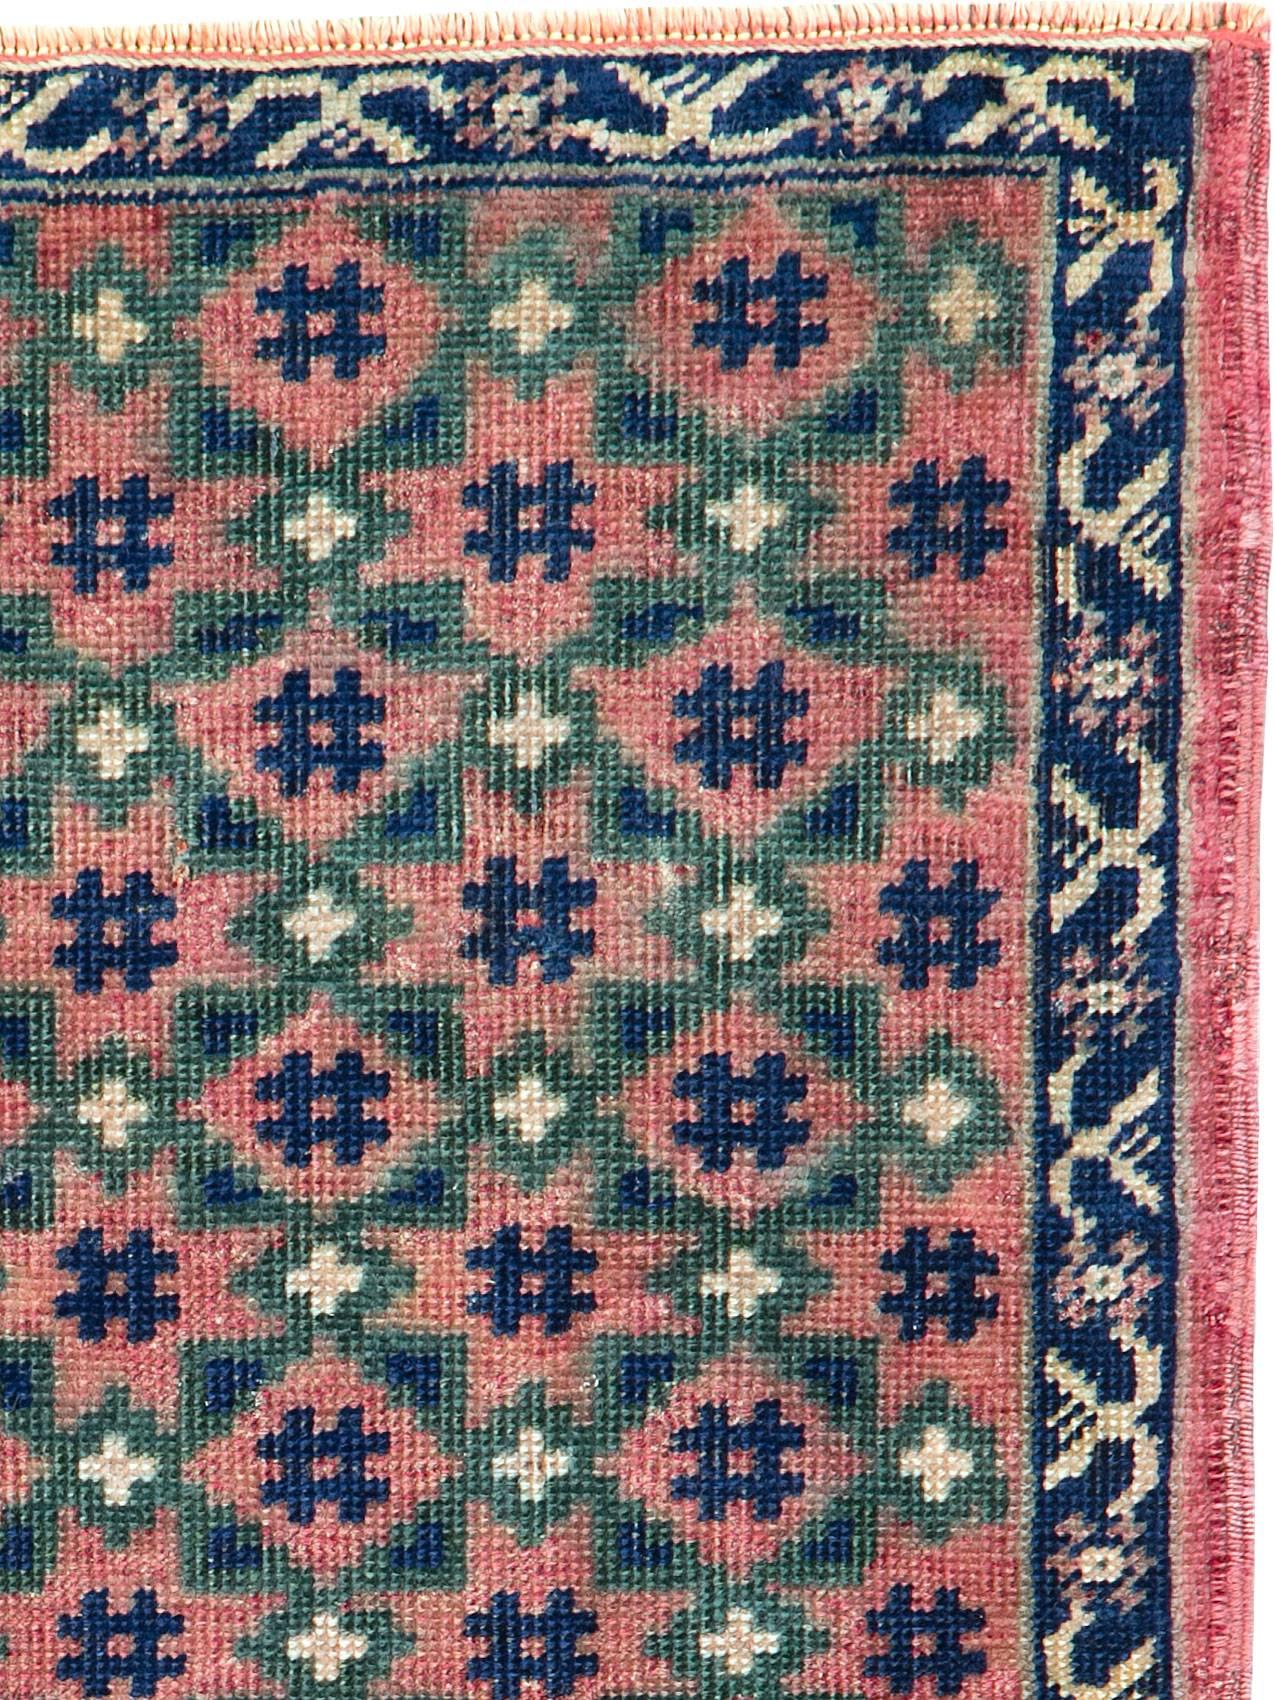 A vintage Persian Baluch carpet from the second quarter of the 20th century.